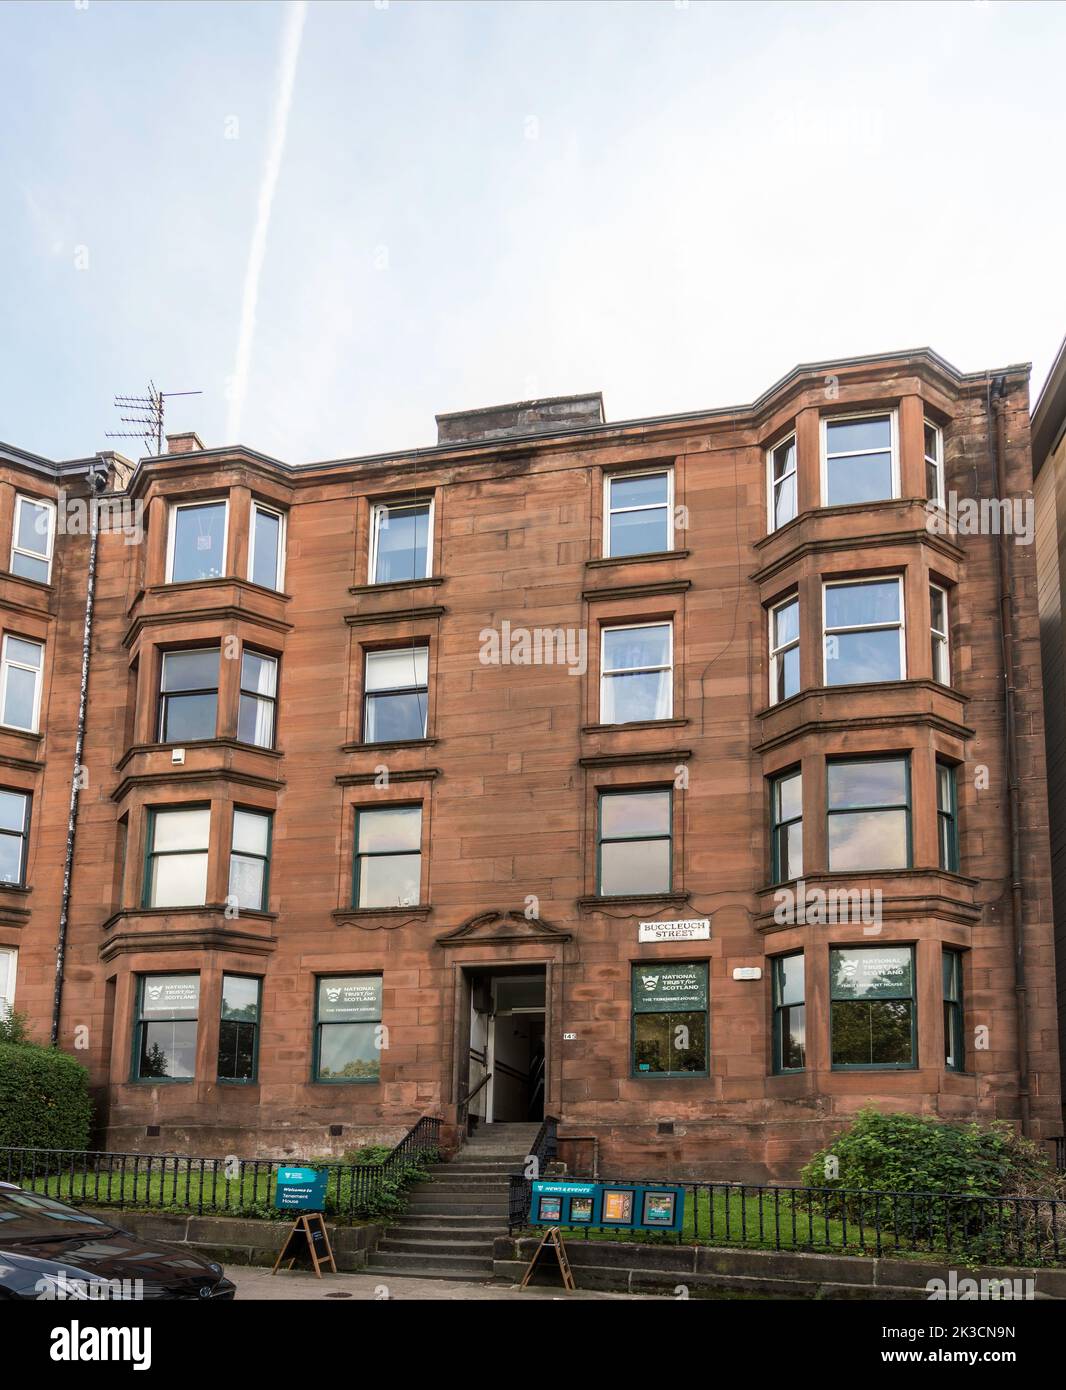 The Tenement House a National Trust for Scotland Property at 145 Buccleuch St, Glasgow, Scotland, UK Foto Stock